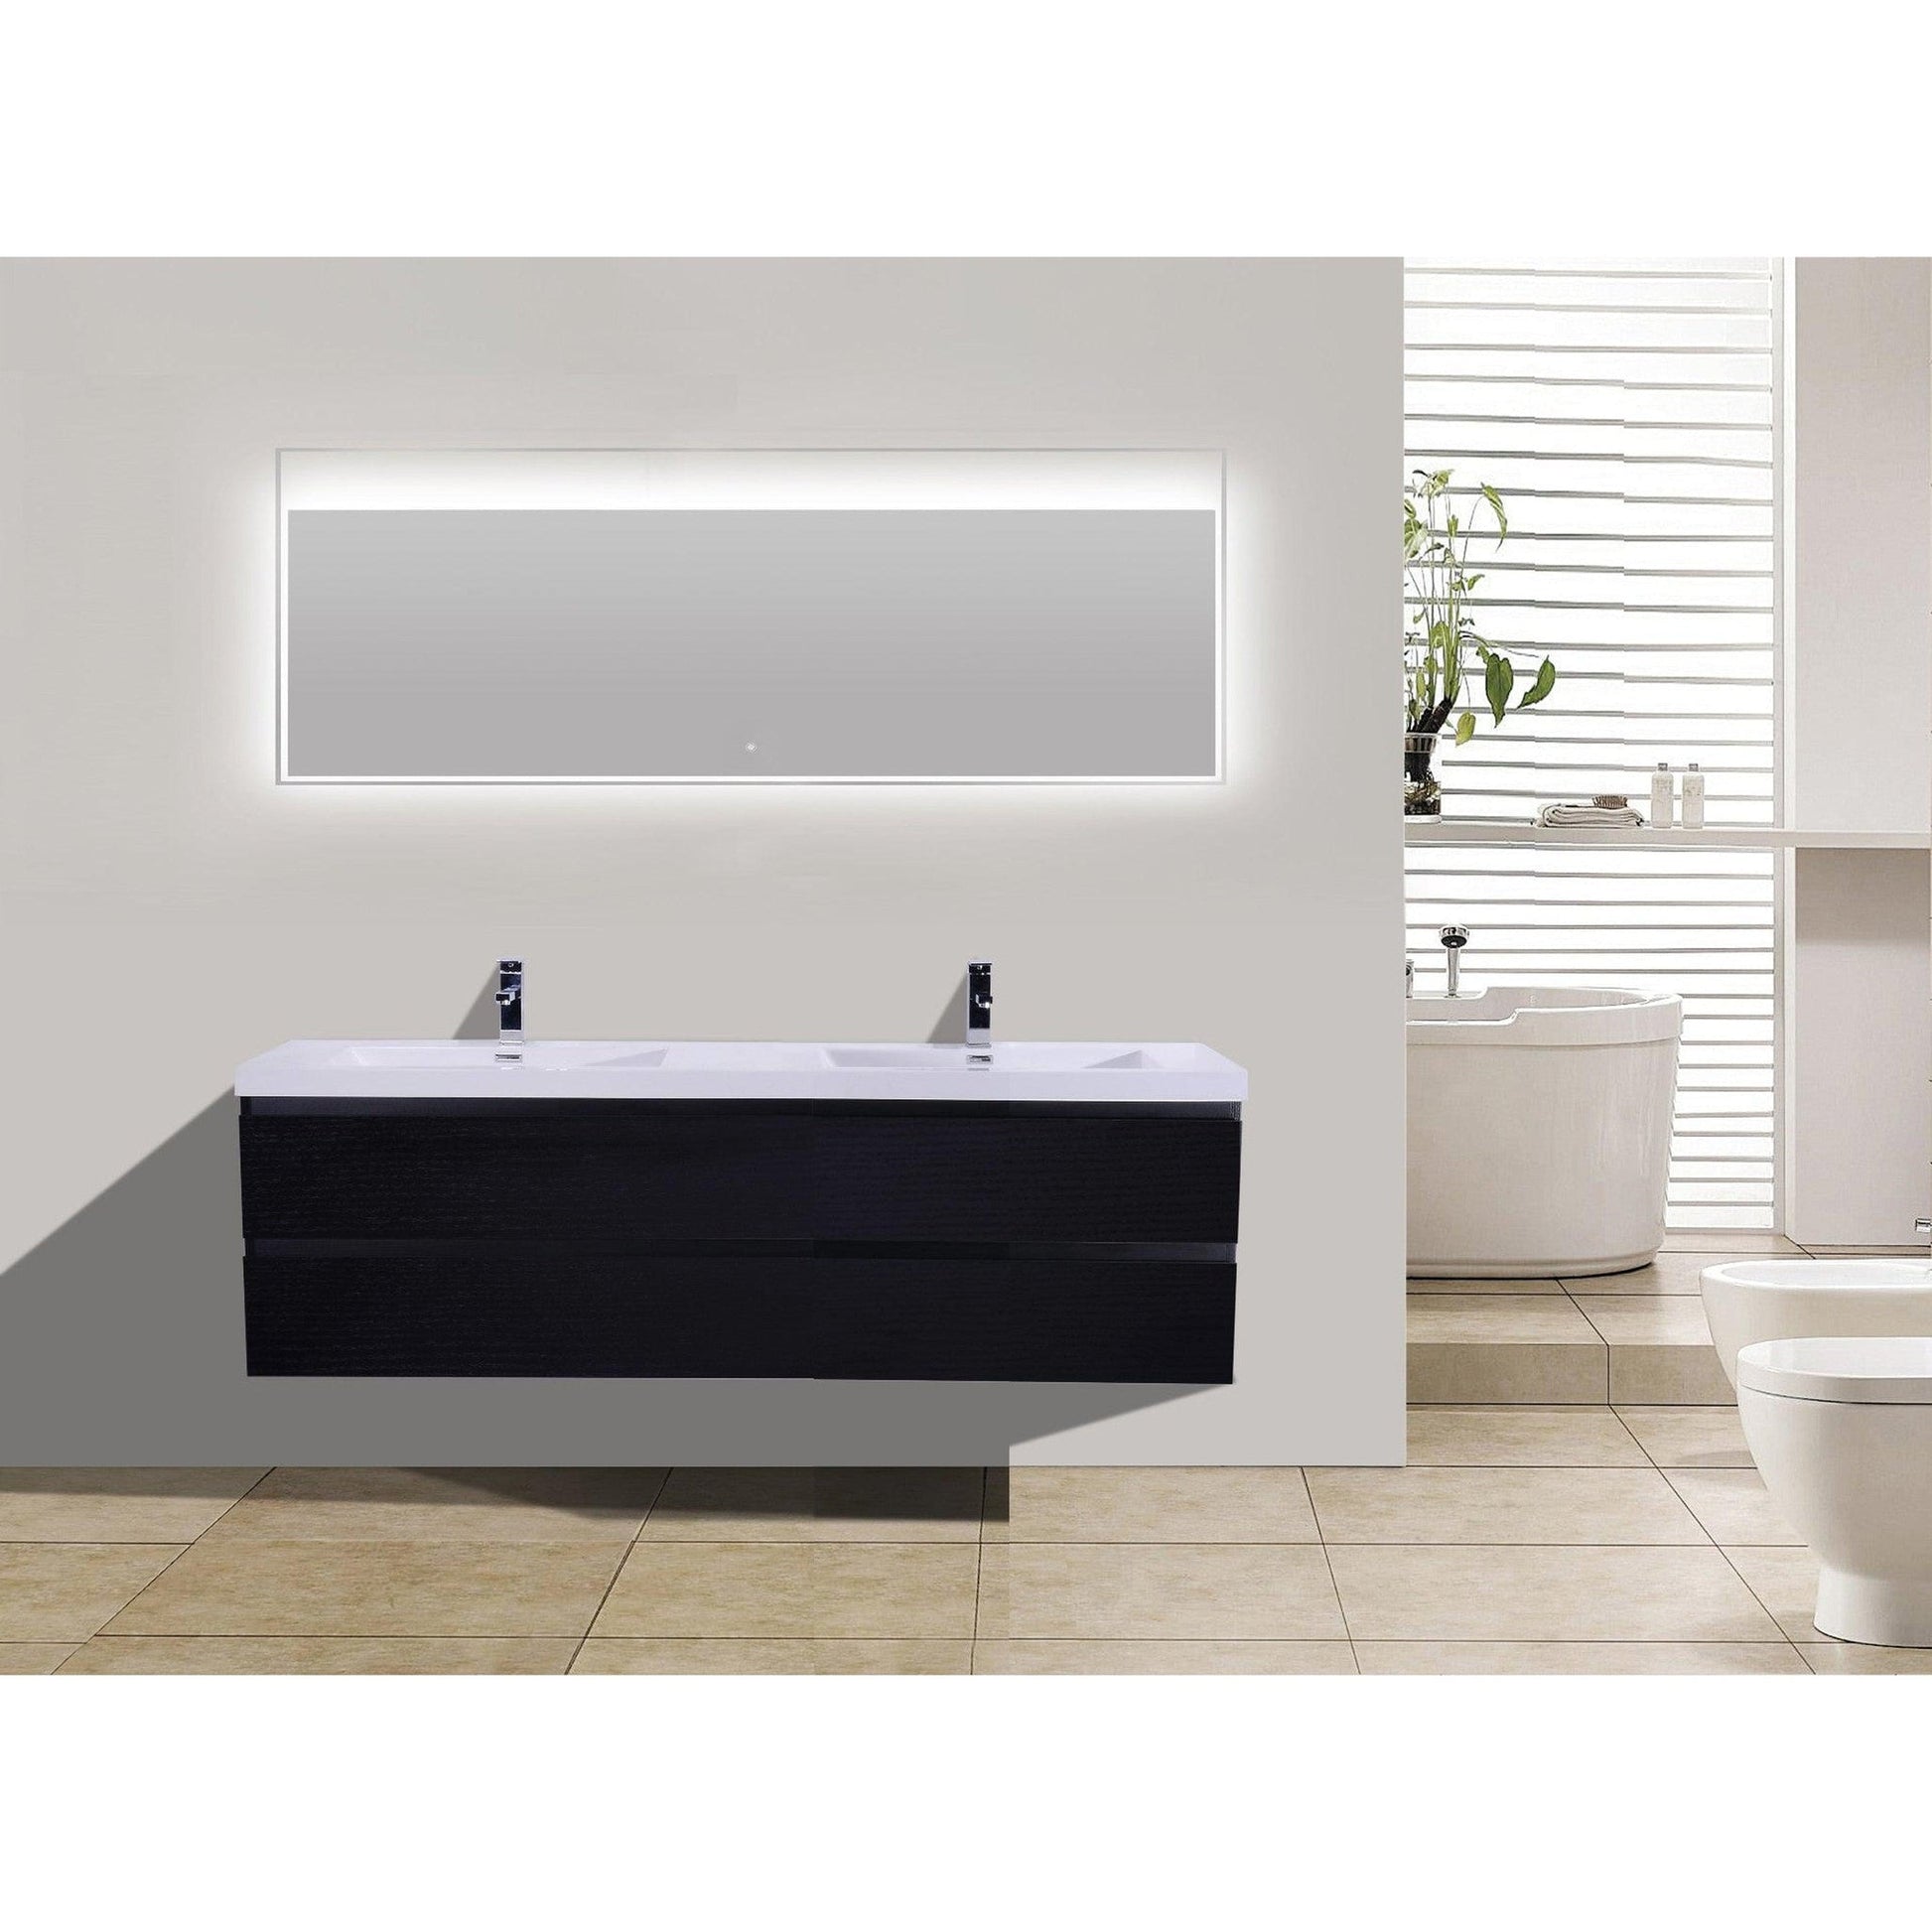 Moreno Bath Bohemia Lina 72" Rich Black Wall-Mounted Vanity With Double Reinforced White Acrylic Sinks